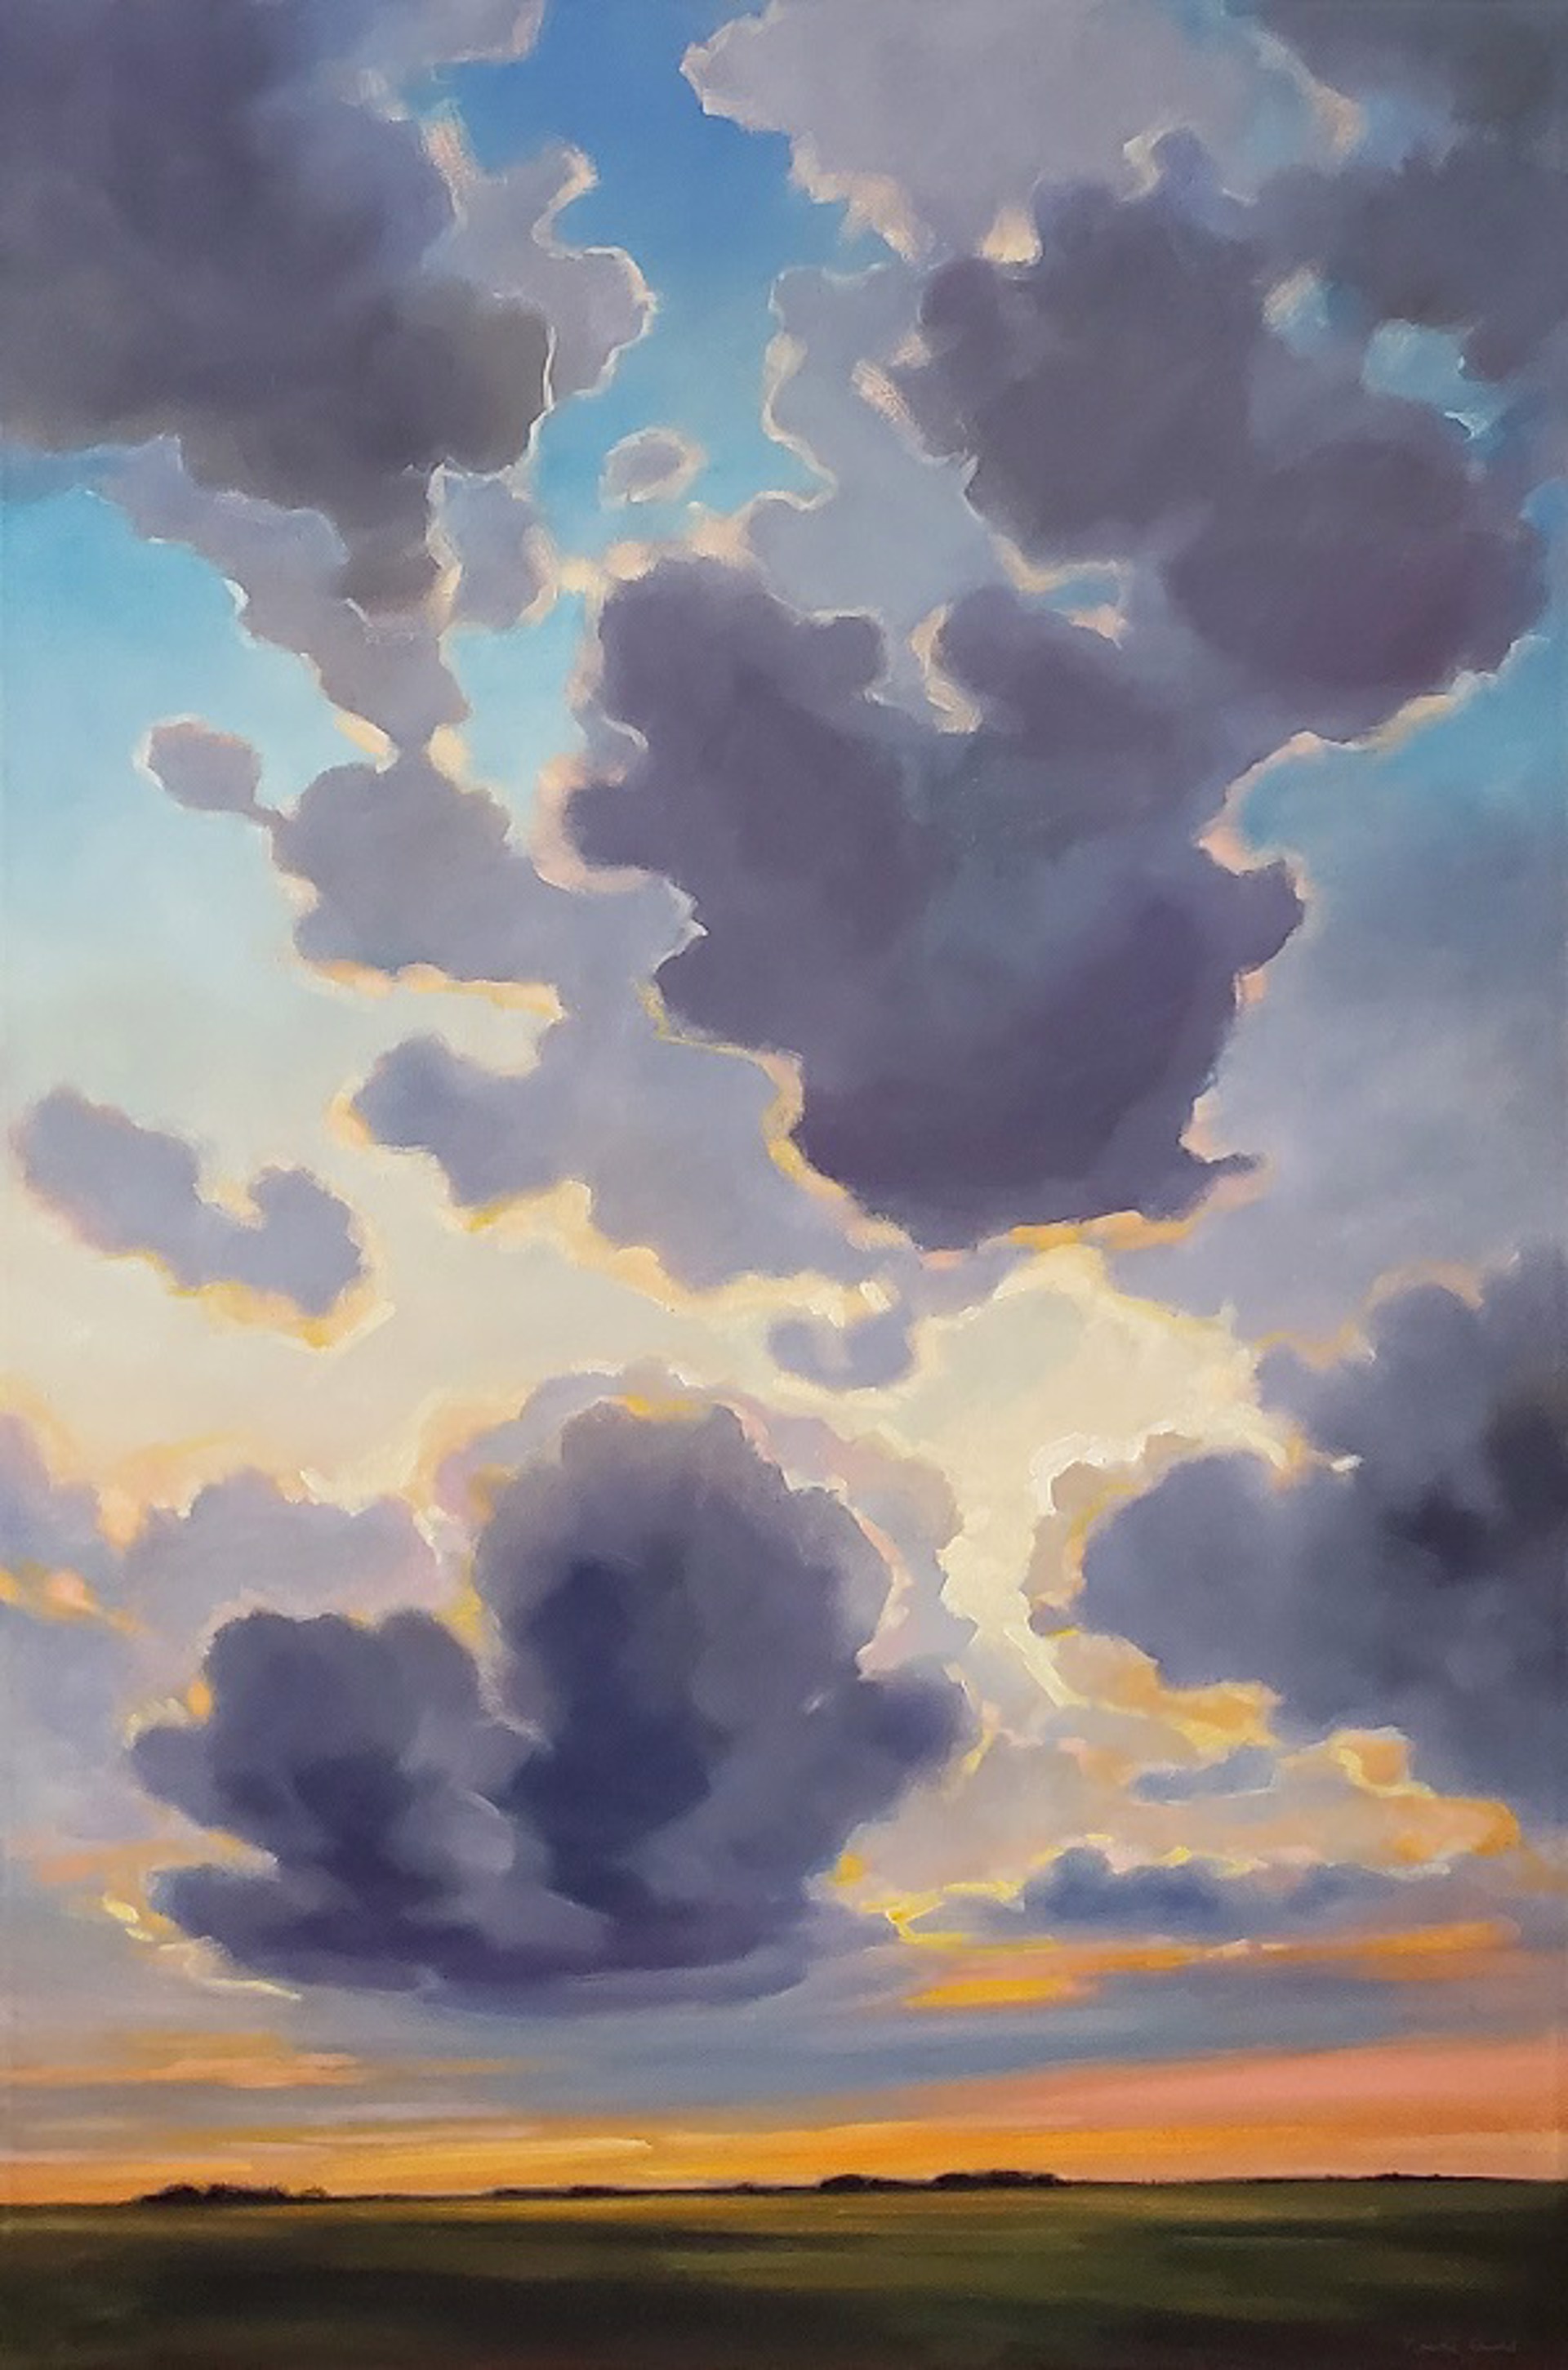 The Sky Opening - Sun Rising by Nicki Ault